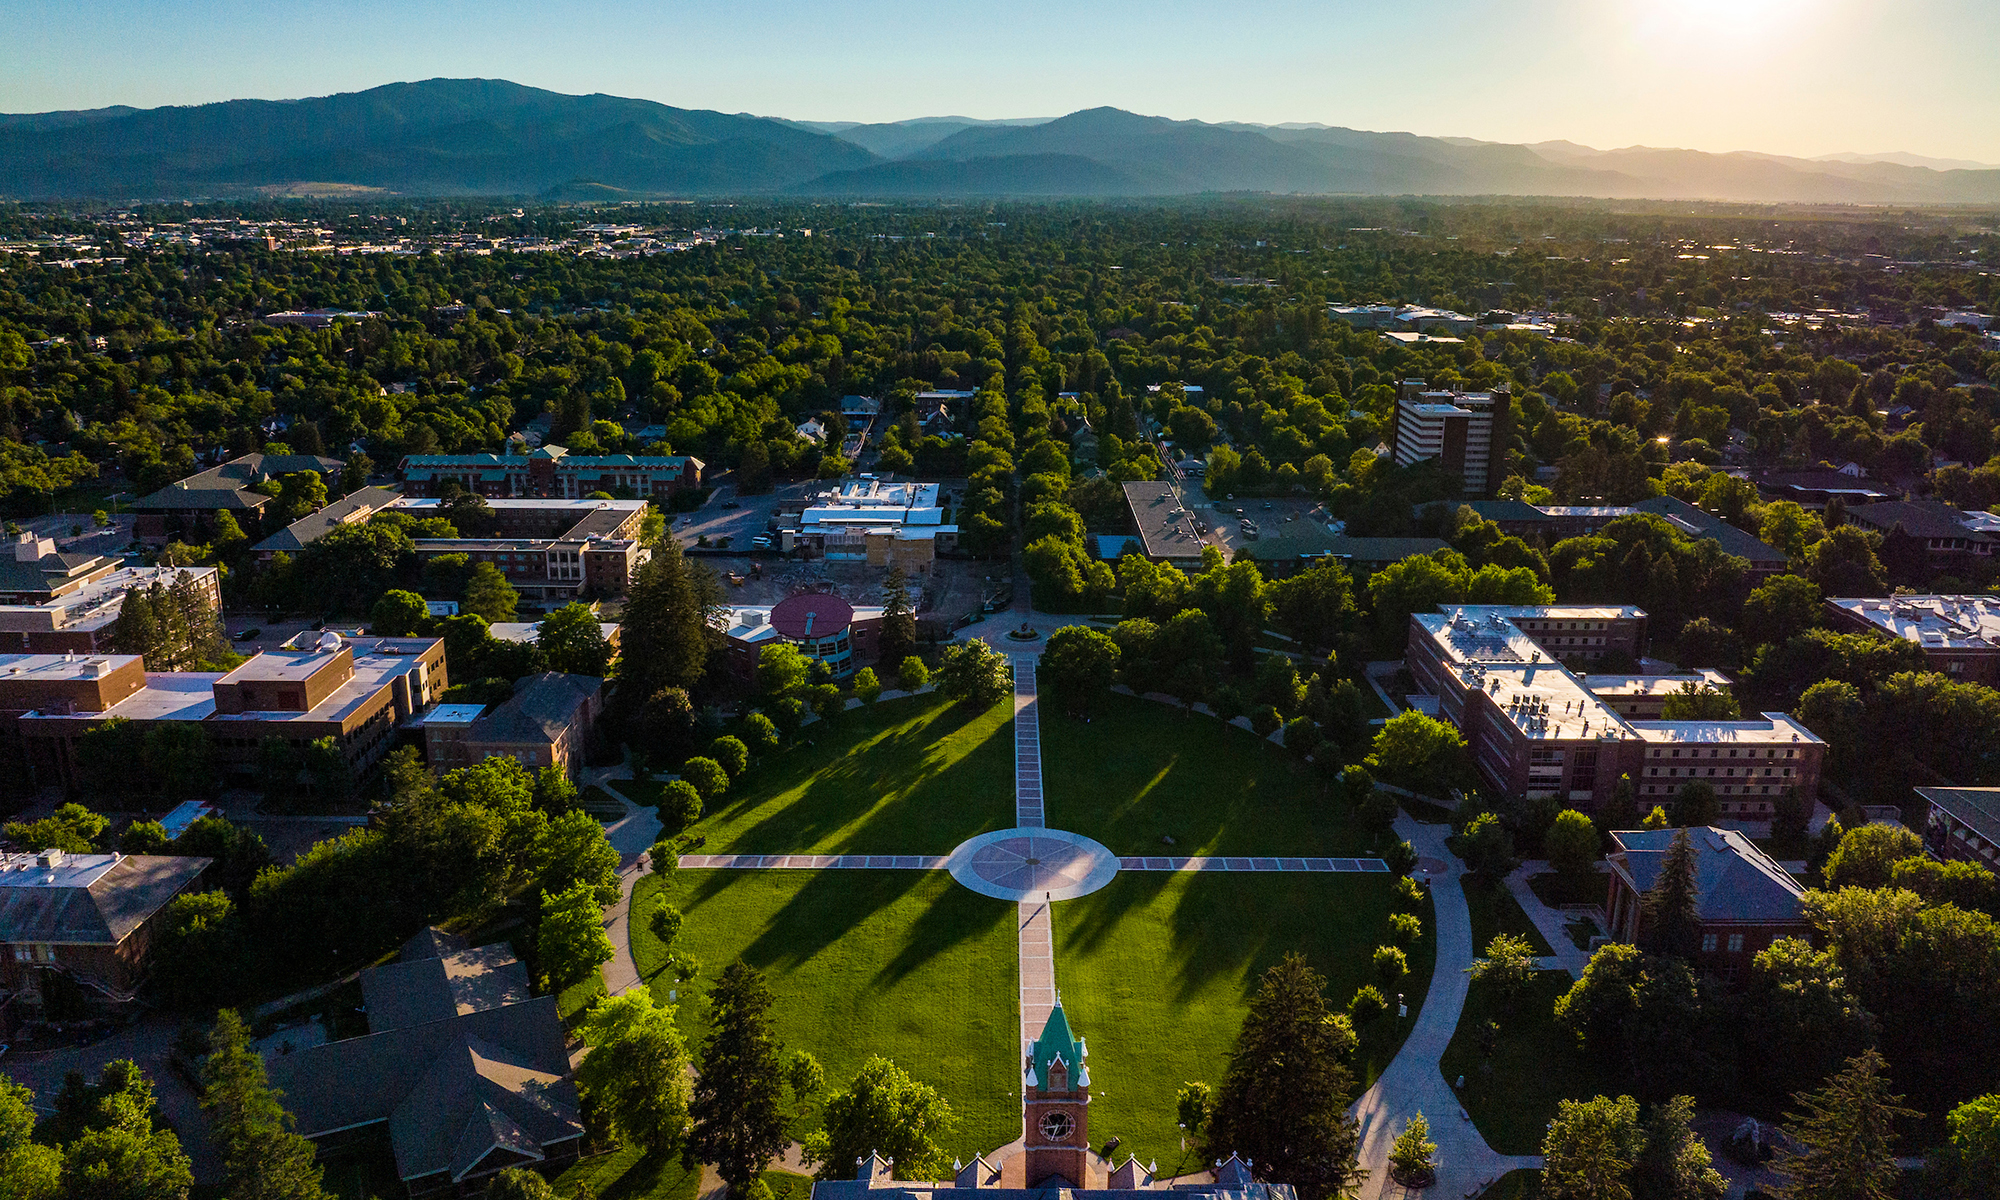 Looking west across the UM campus as the sun sets in the West and casts long shadows